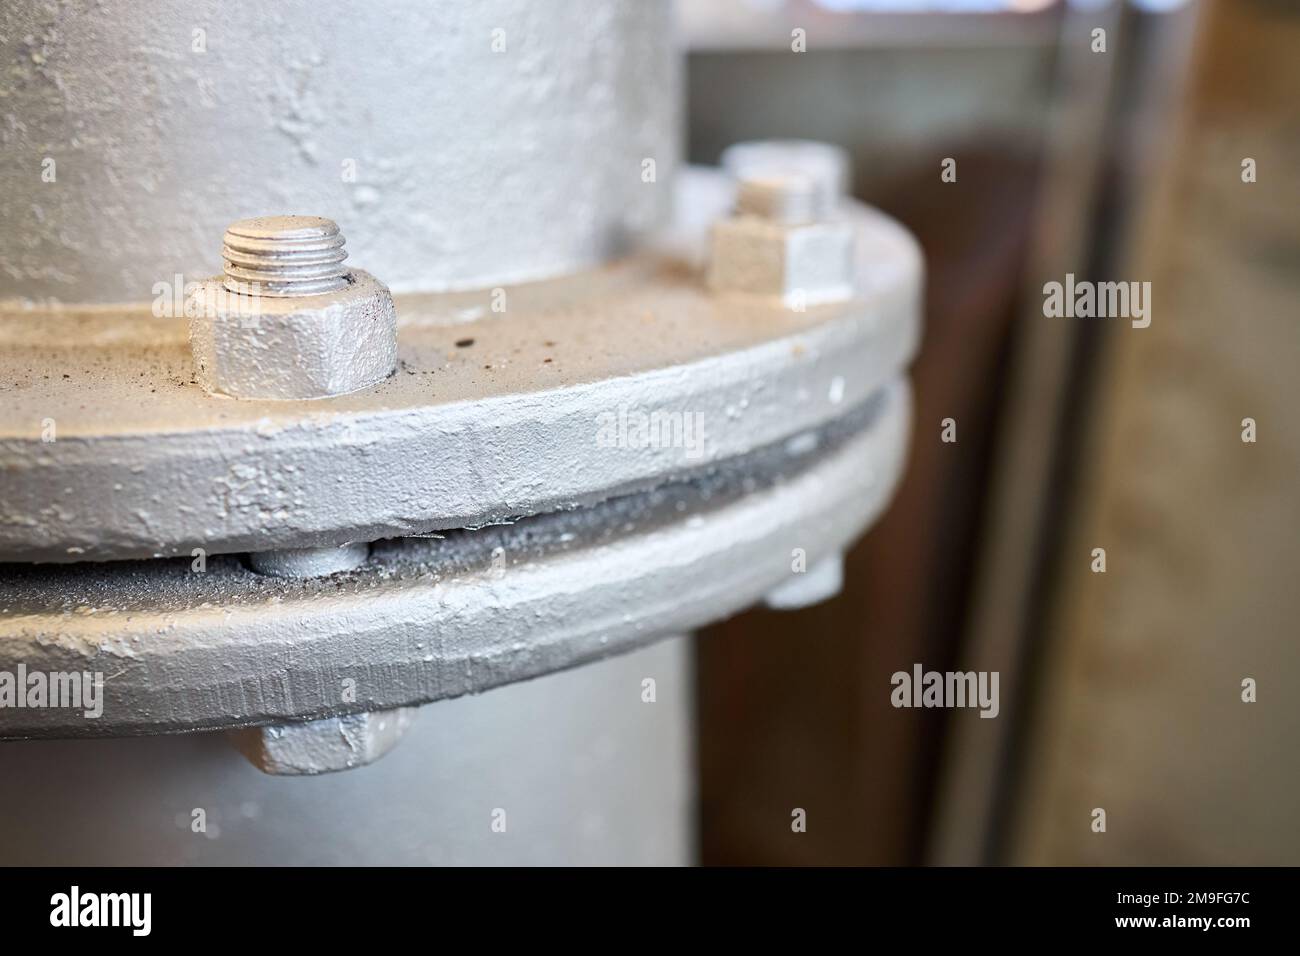 https://c8.alamy.com/comp/2M9FG7C/bolted-screw-flenged-connection-sealing-connection-on-manhole-of-industrial-machine-compressor-or-pump-on-chemical-plant-selective-focus-with-out-of-2M9FG7C.jpg